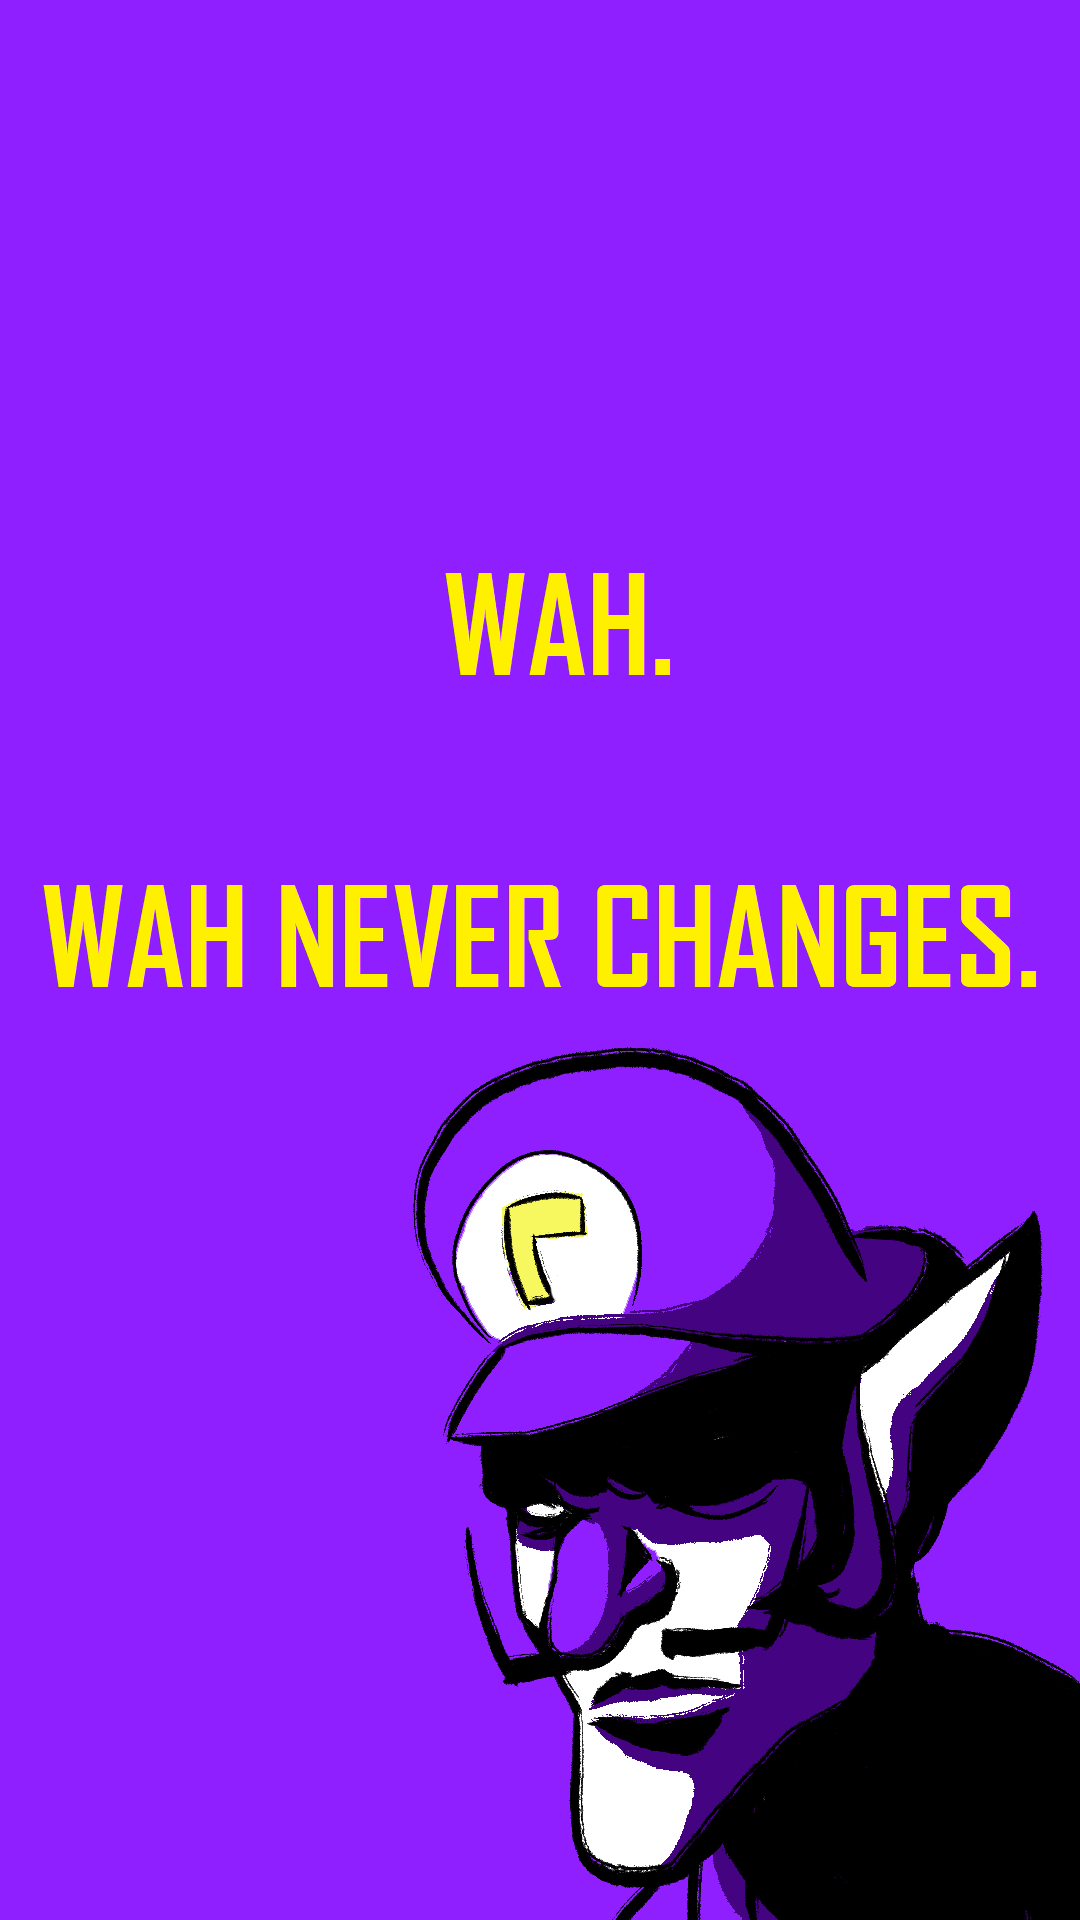 Had to share this. Didn't know where else to post it: Waluigi